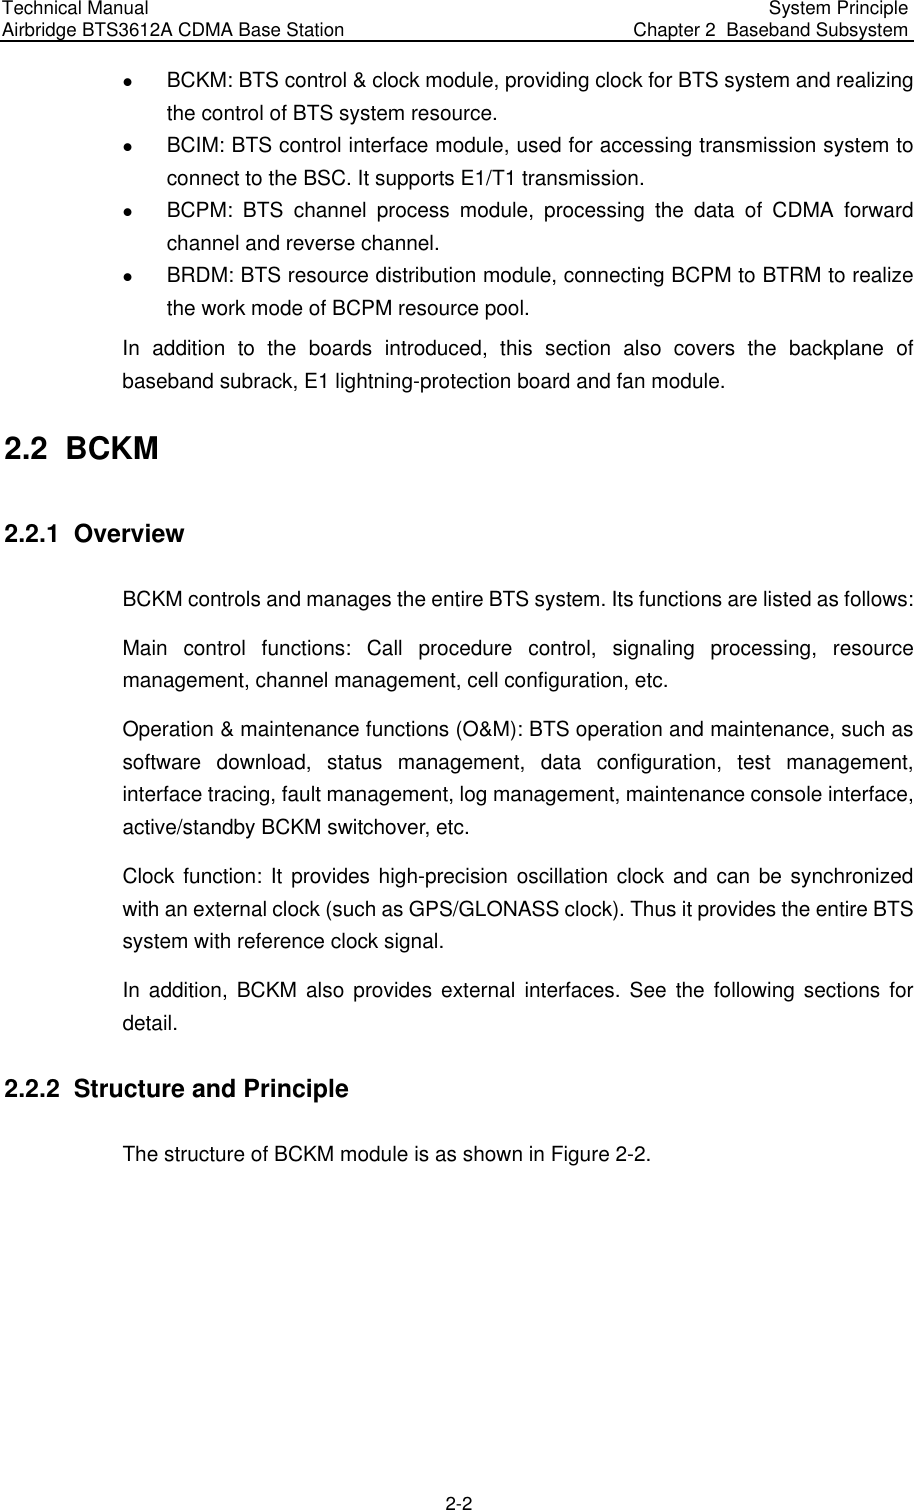 Technical Manual  Airbridge BTS3612A CDMA Base Station  System Principle  Chapter 2  Baseband Subsystem  2-2 z BCKM: BTS control &amp; clock module, providing clock for BTS system and realizing the control of BTS system resource.  z BCIM: BTS control interface module, used for accessing transmission system to connect to the BSC. It supports E1/T1 transmission. z BCPM: BTS channel process module, processing the data of CDMA forward channel and reverse channel.  z BRDM: BTS resource distribution module, connecting BCPM to BTRM to realize the work mode of BCPM resource pool. In addition to the boards introduced, this section also covers the backplane of baseband subrack, E1 lightning-protection board and fan module. 2.2  BCKM 2.2.1  Overview BCKM controls and manages the entire BTS system. Its functions are listed as follows:  Main control functions: Call procedure control, signaling processing, resource management, channel management, cell configuration, etc. Operation &amp; maintenance functions (O&amp;M): BTS operation and maintenance, such as software download, status management, data configuration, test management, interface tracing, fault management, log management, maintenance console interface, active/standby BCKM switchover, etc.  Clock function: It provides high-precision oscillation clock and can be synchronized with an external clock (such as GPS/GLONASS clock). Thus it provides the entire BTS system with reference clock signal. In addition, BCKM also provides external interfaces. See the following sections for detail. 2.2.2  Structure and Principle The structure of BCKM module is as shown in Figure 2-2.  